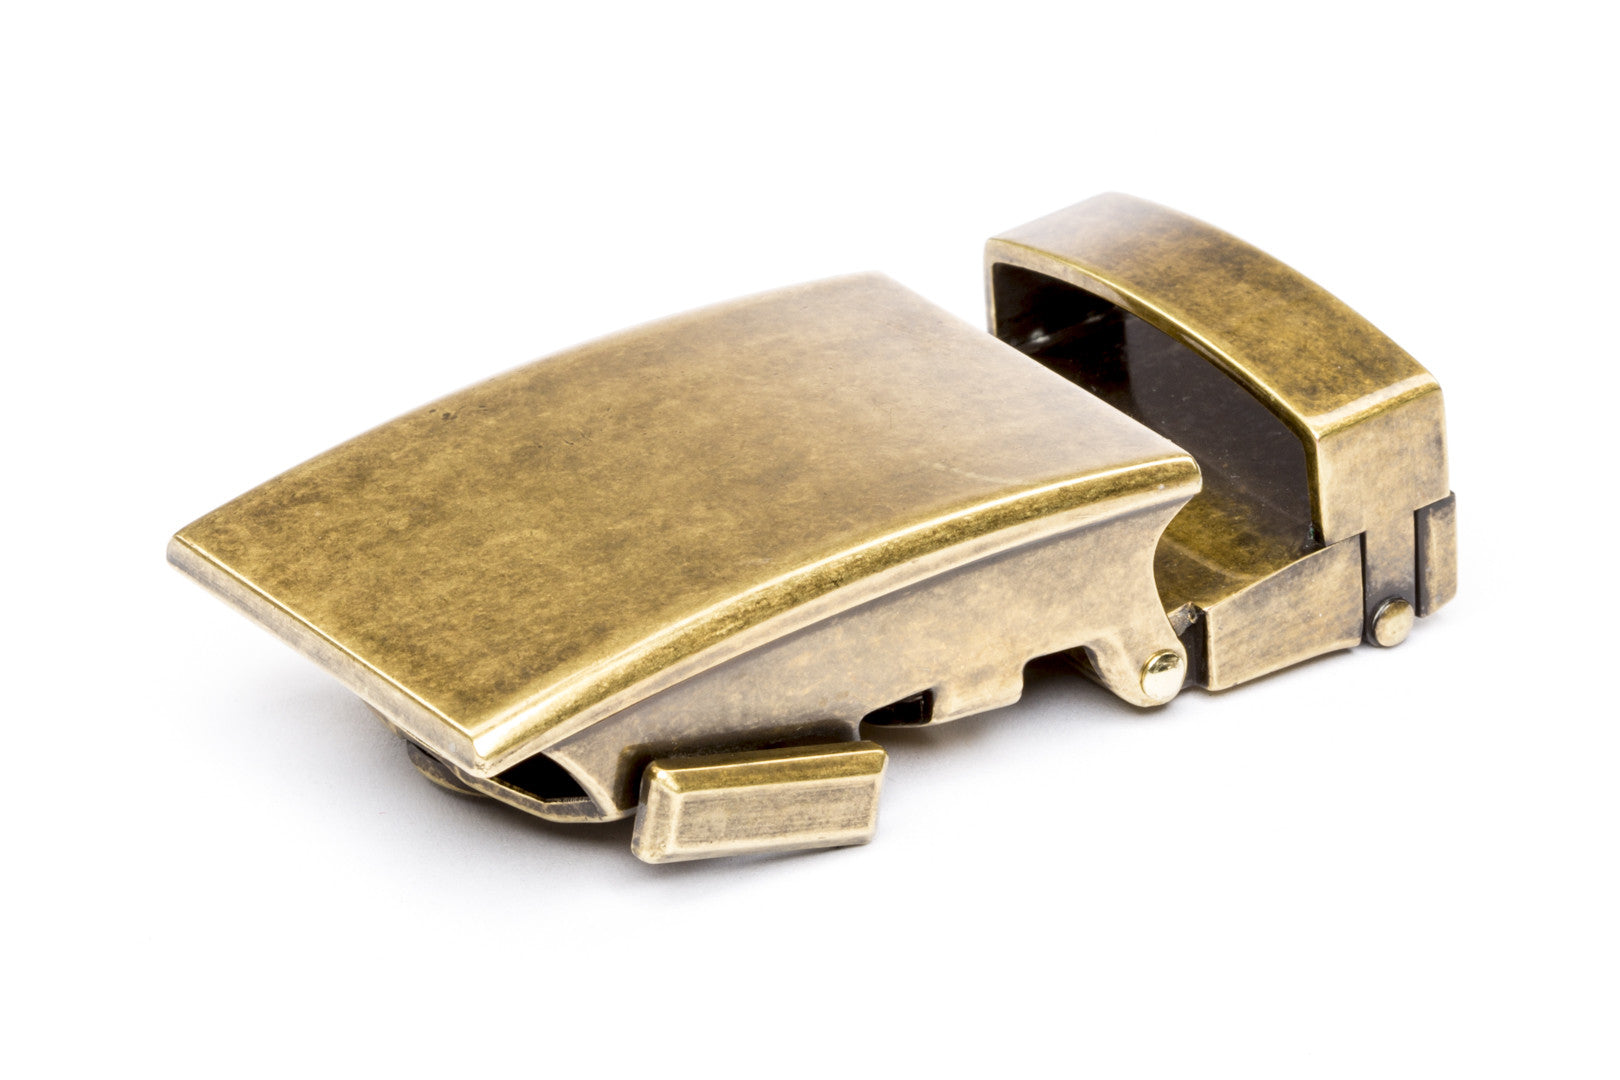 Men's classic ratchet belt buckle in antiqued gold with a 1.25-inch width.